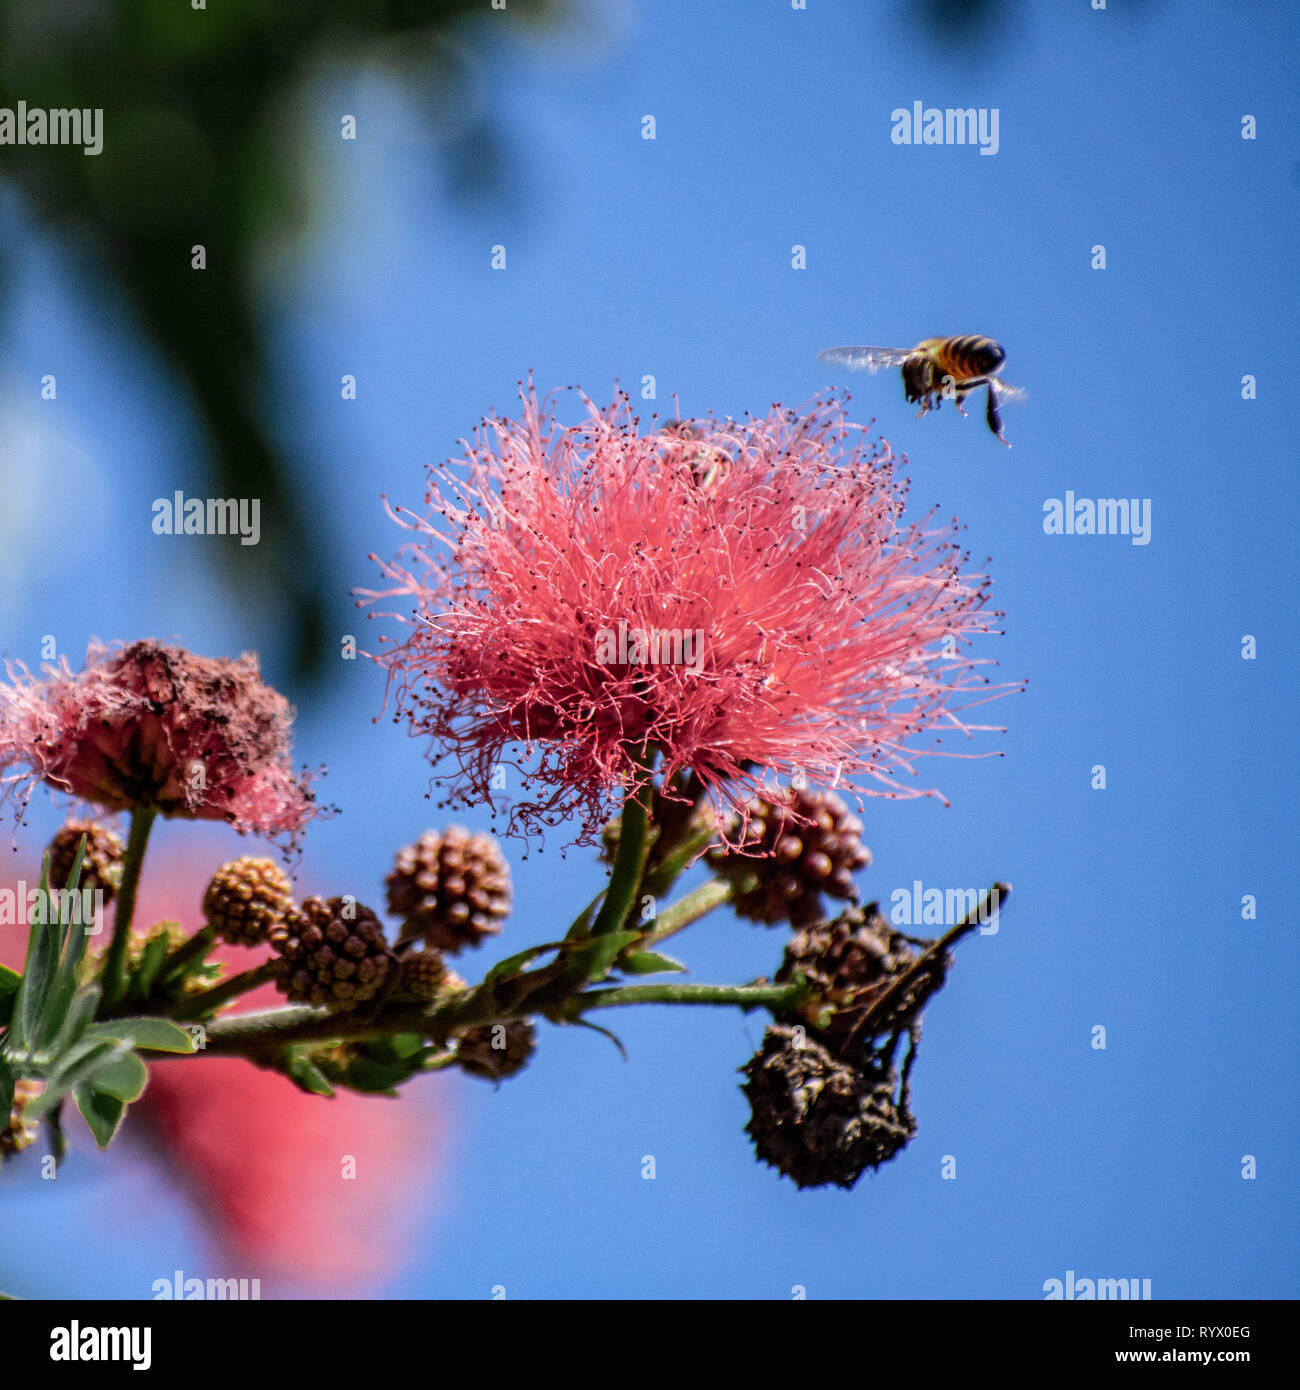 A honey bee approaching a large red flower. Stock Photo